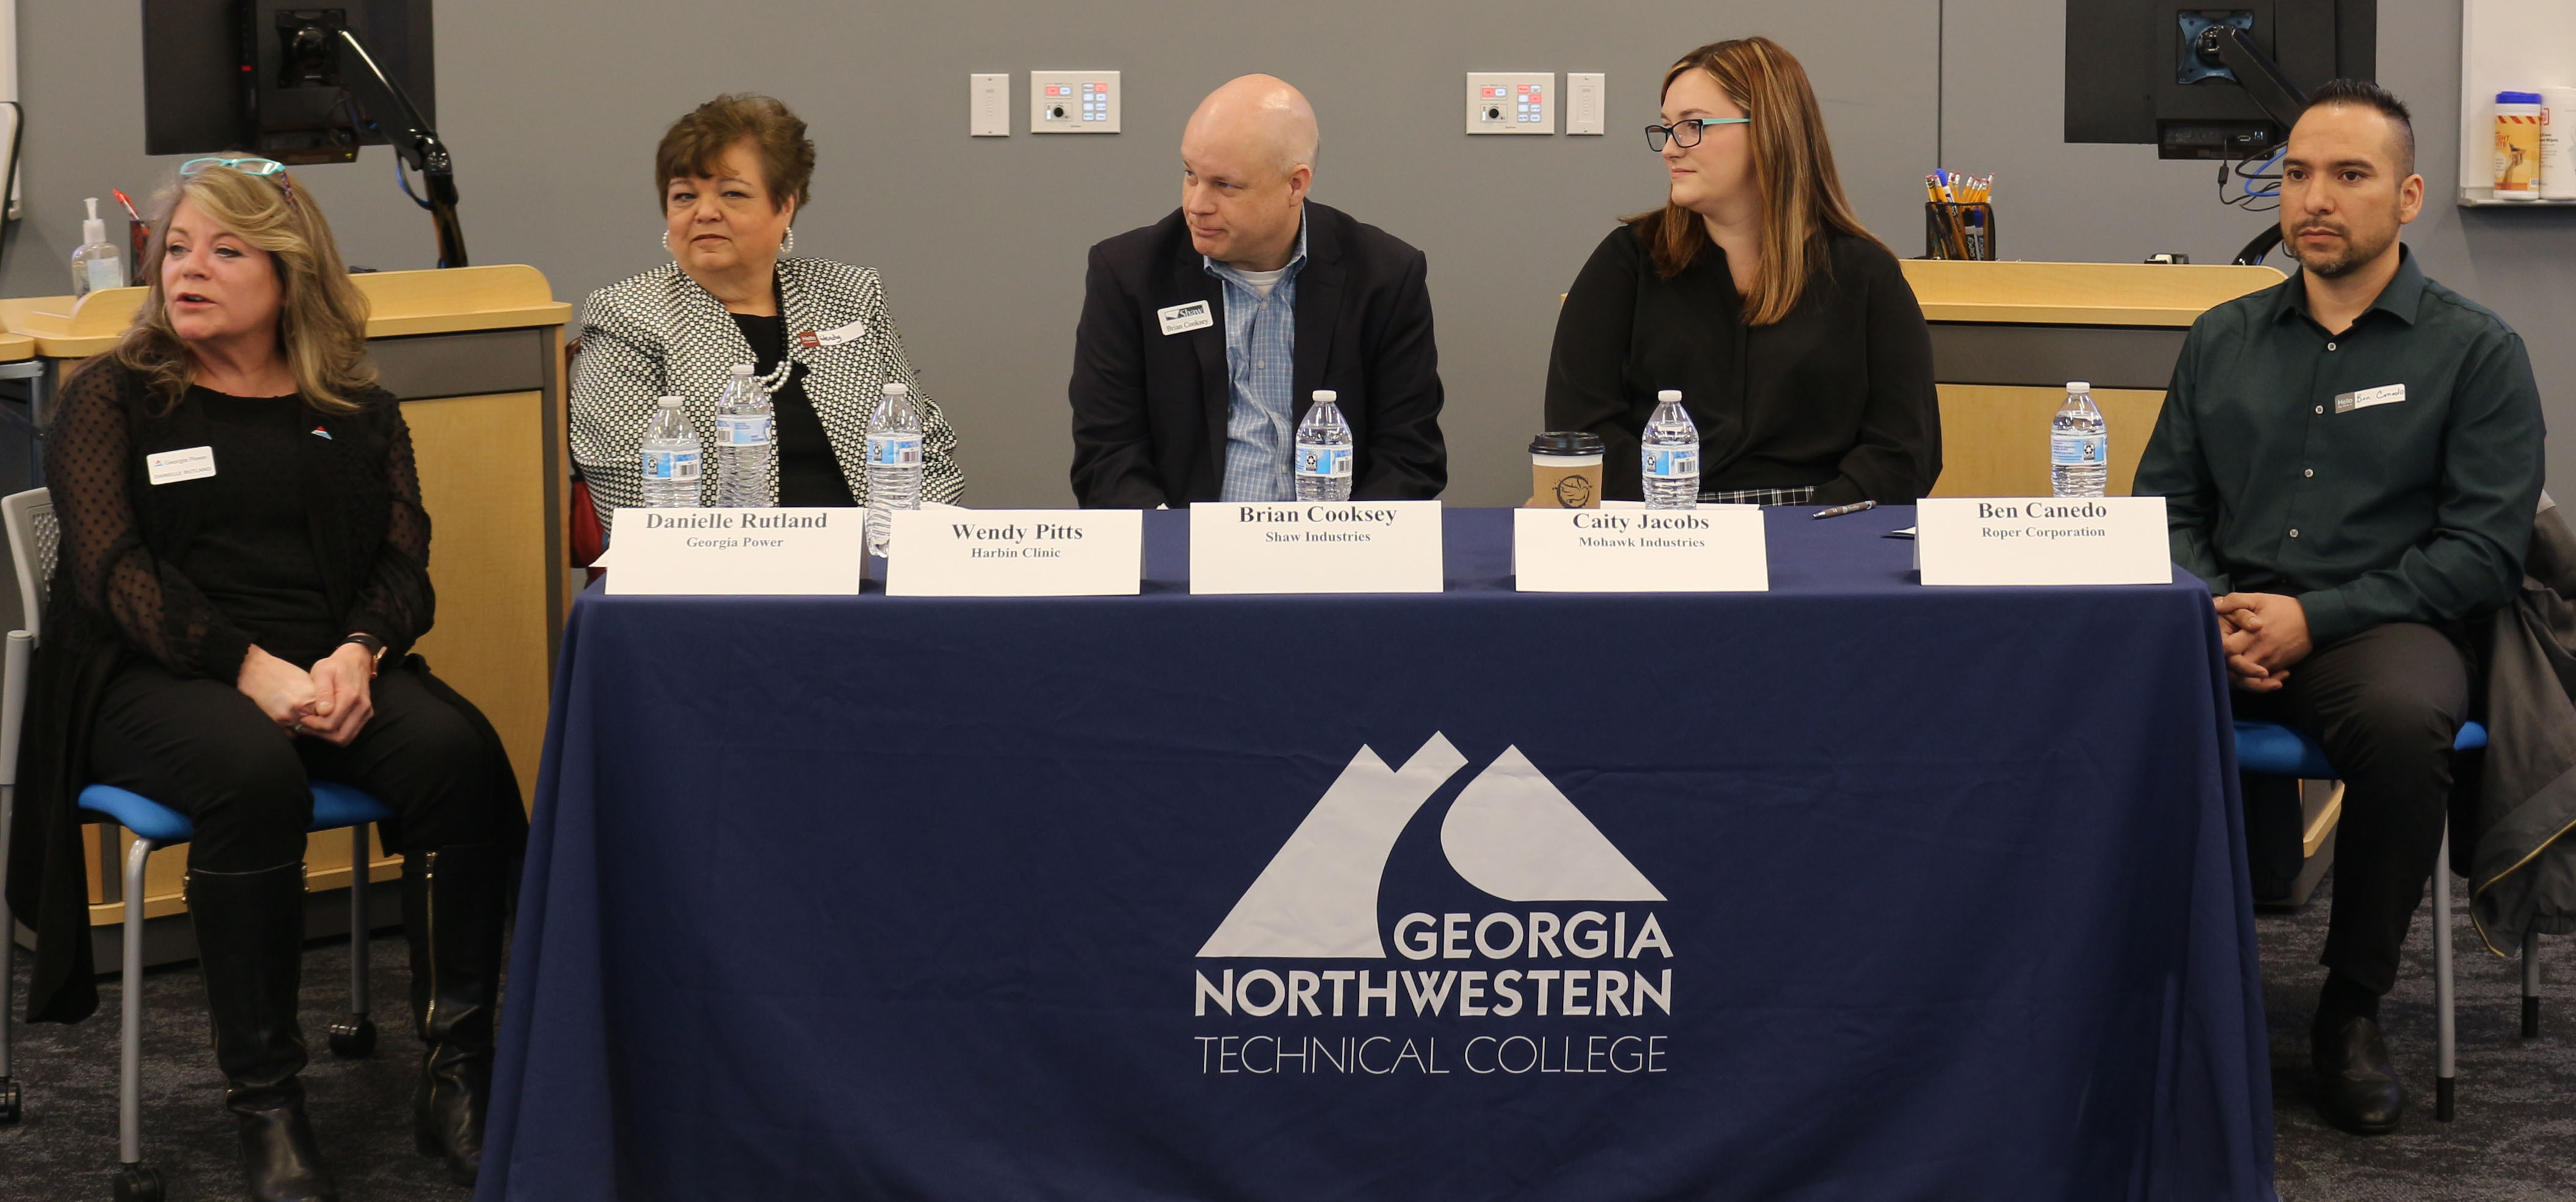 (From left) Danielle Rutland, Workforce Strategy manager at Georgia Power; Wendy Pitts, chief operating officer at Harbin Clinic; Brian Cooksey, Workforce Development director at Shaw Industries Group Inc.; Caity Jacobs, Talent Acquisition program manager — Training at Mohawk Industries Inc.; and Ben Canedo, senior Human Resources business partner at Roper Corporation, participate in the employer’s perspective panel discussion.